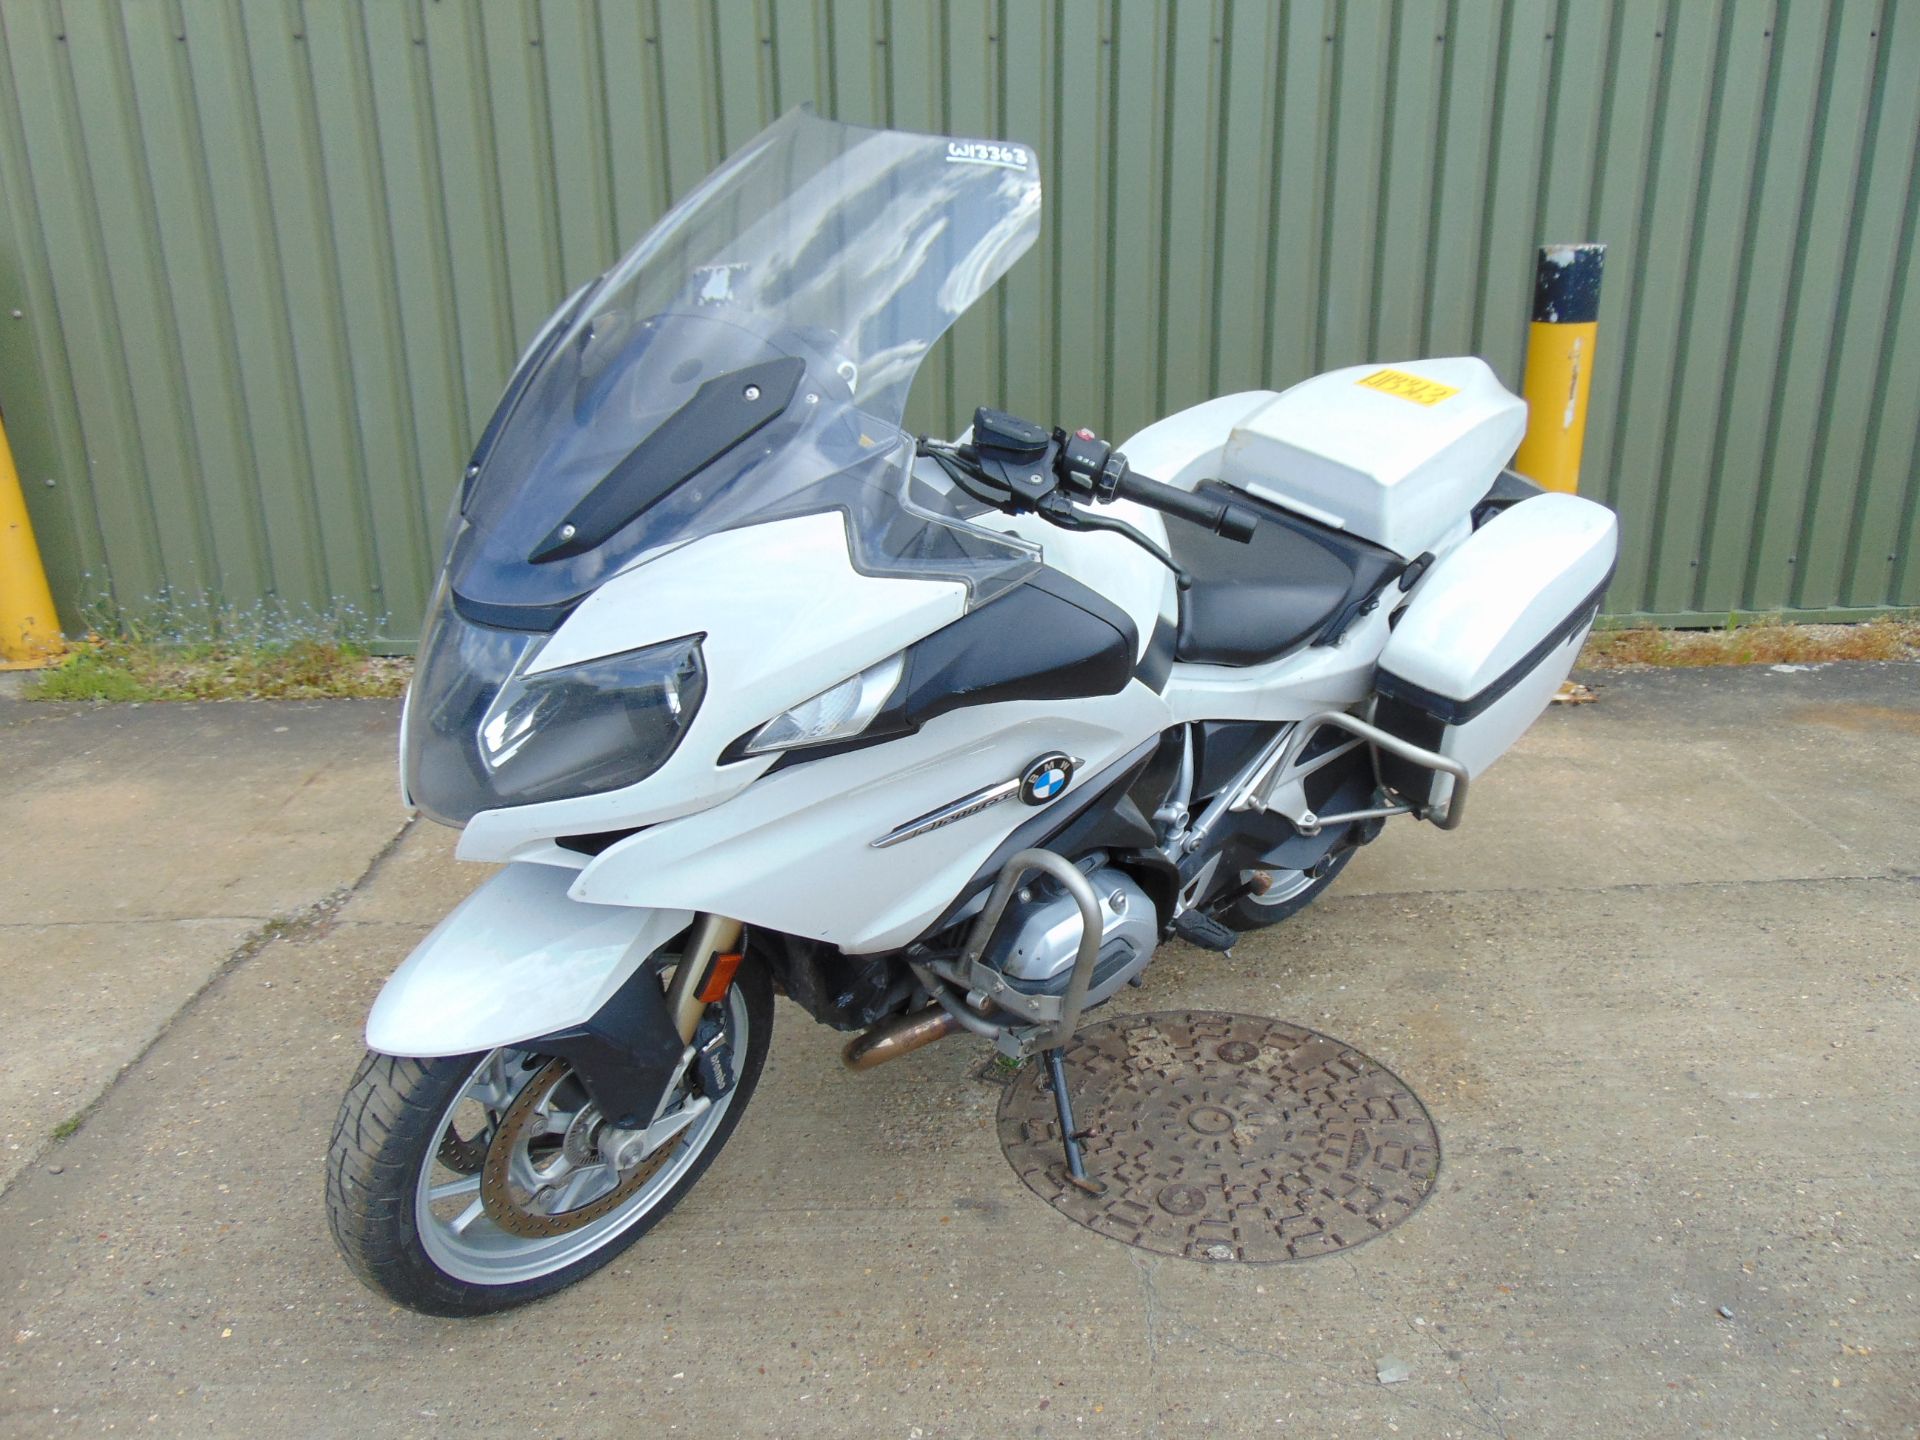 UK Police a 1 Owner 2019 BMW R1200RT Motorbike